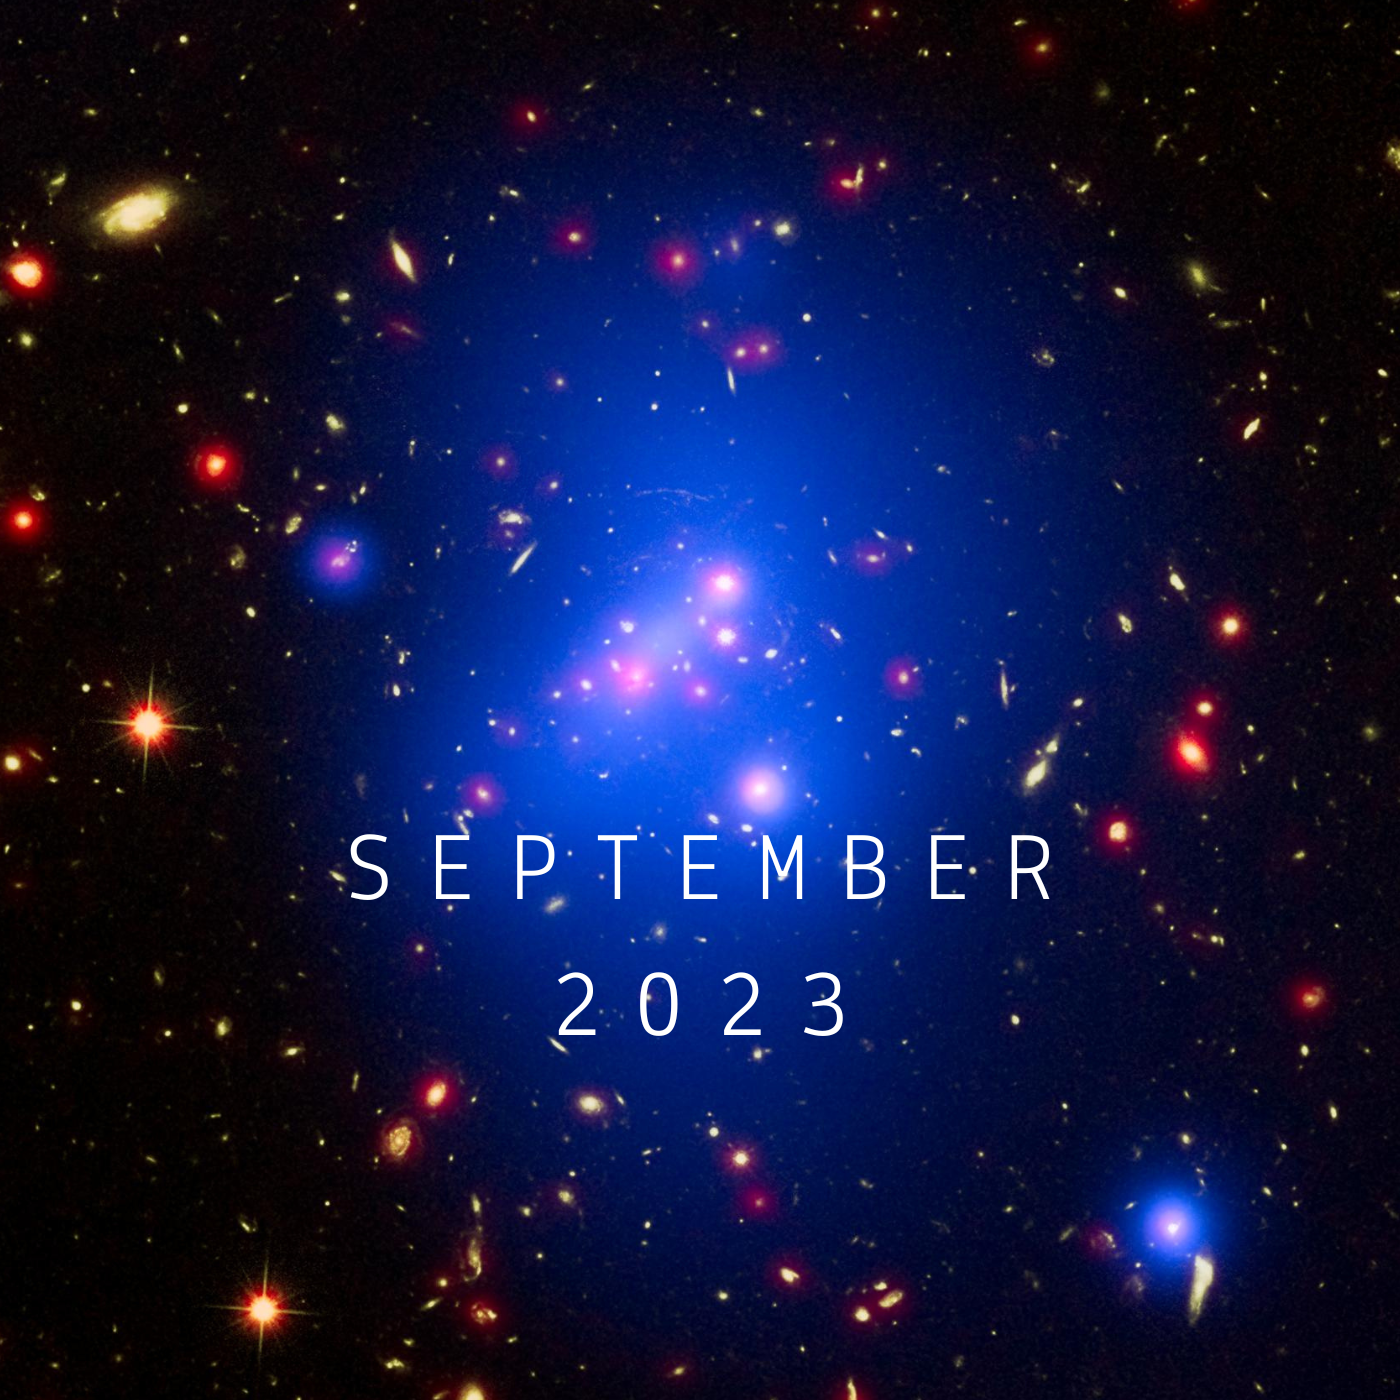 a square nasa image of star and galaxy clusters with september 2023 in the center